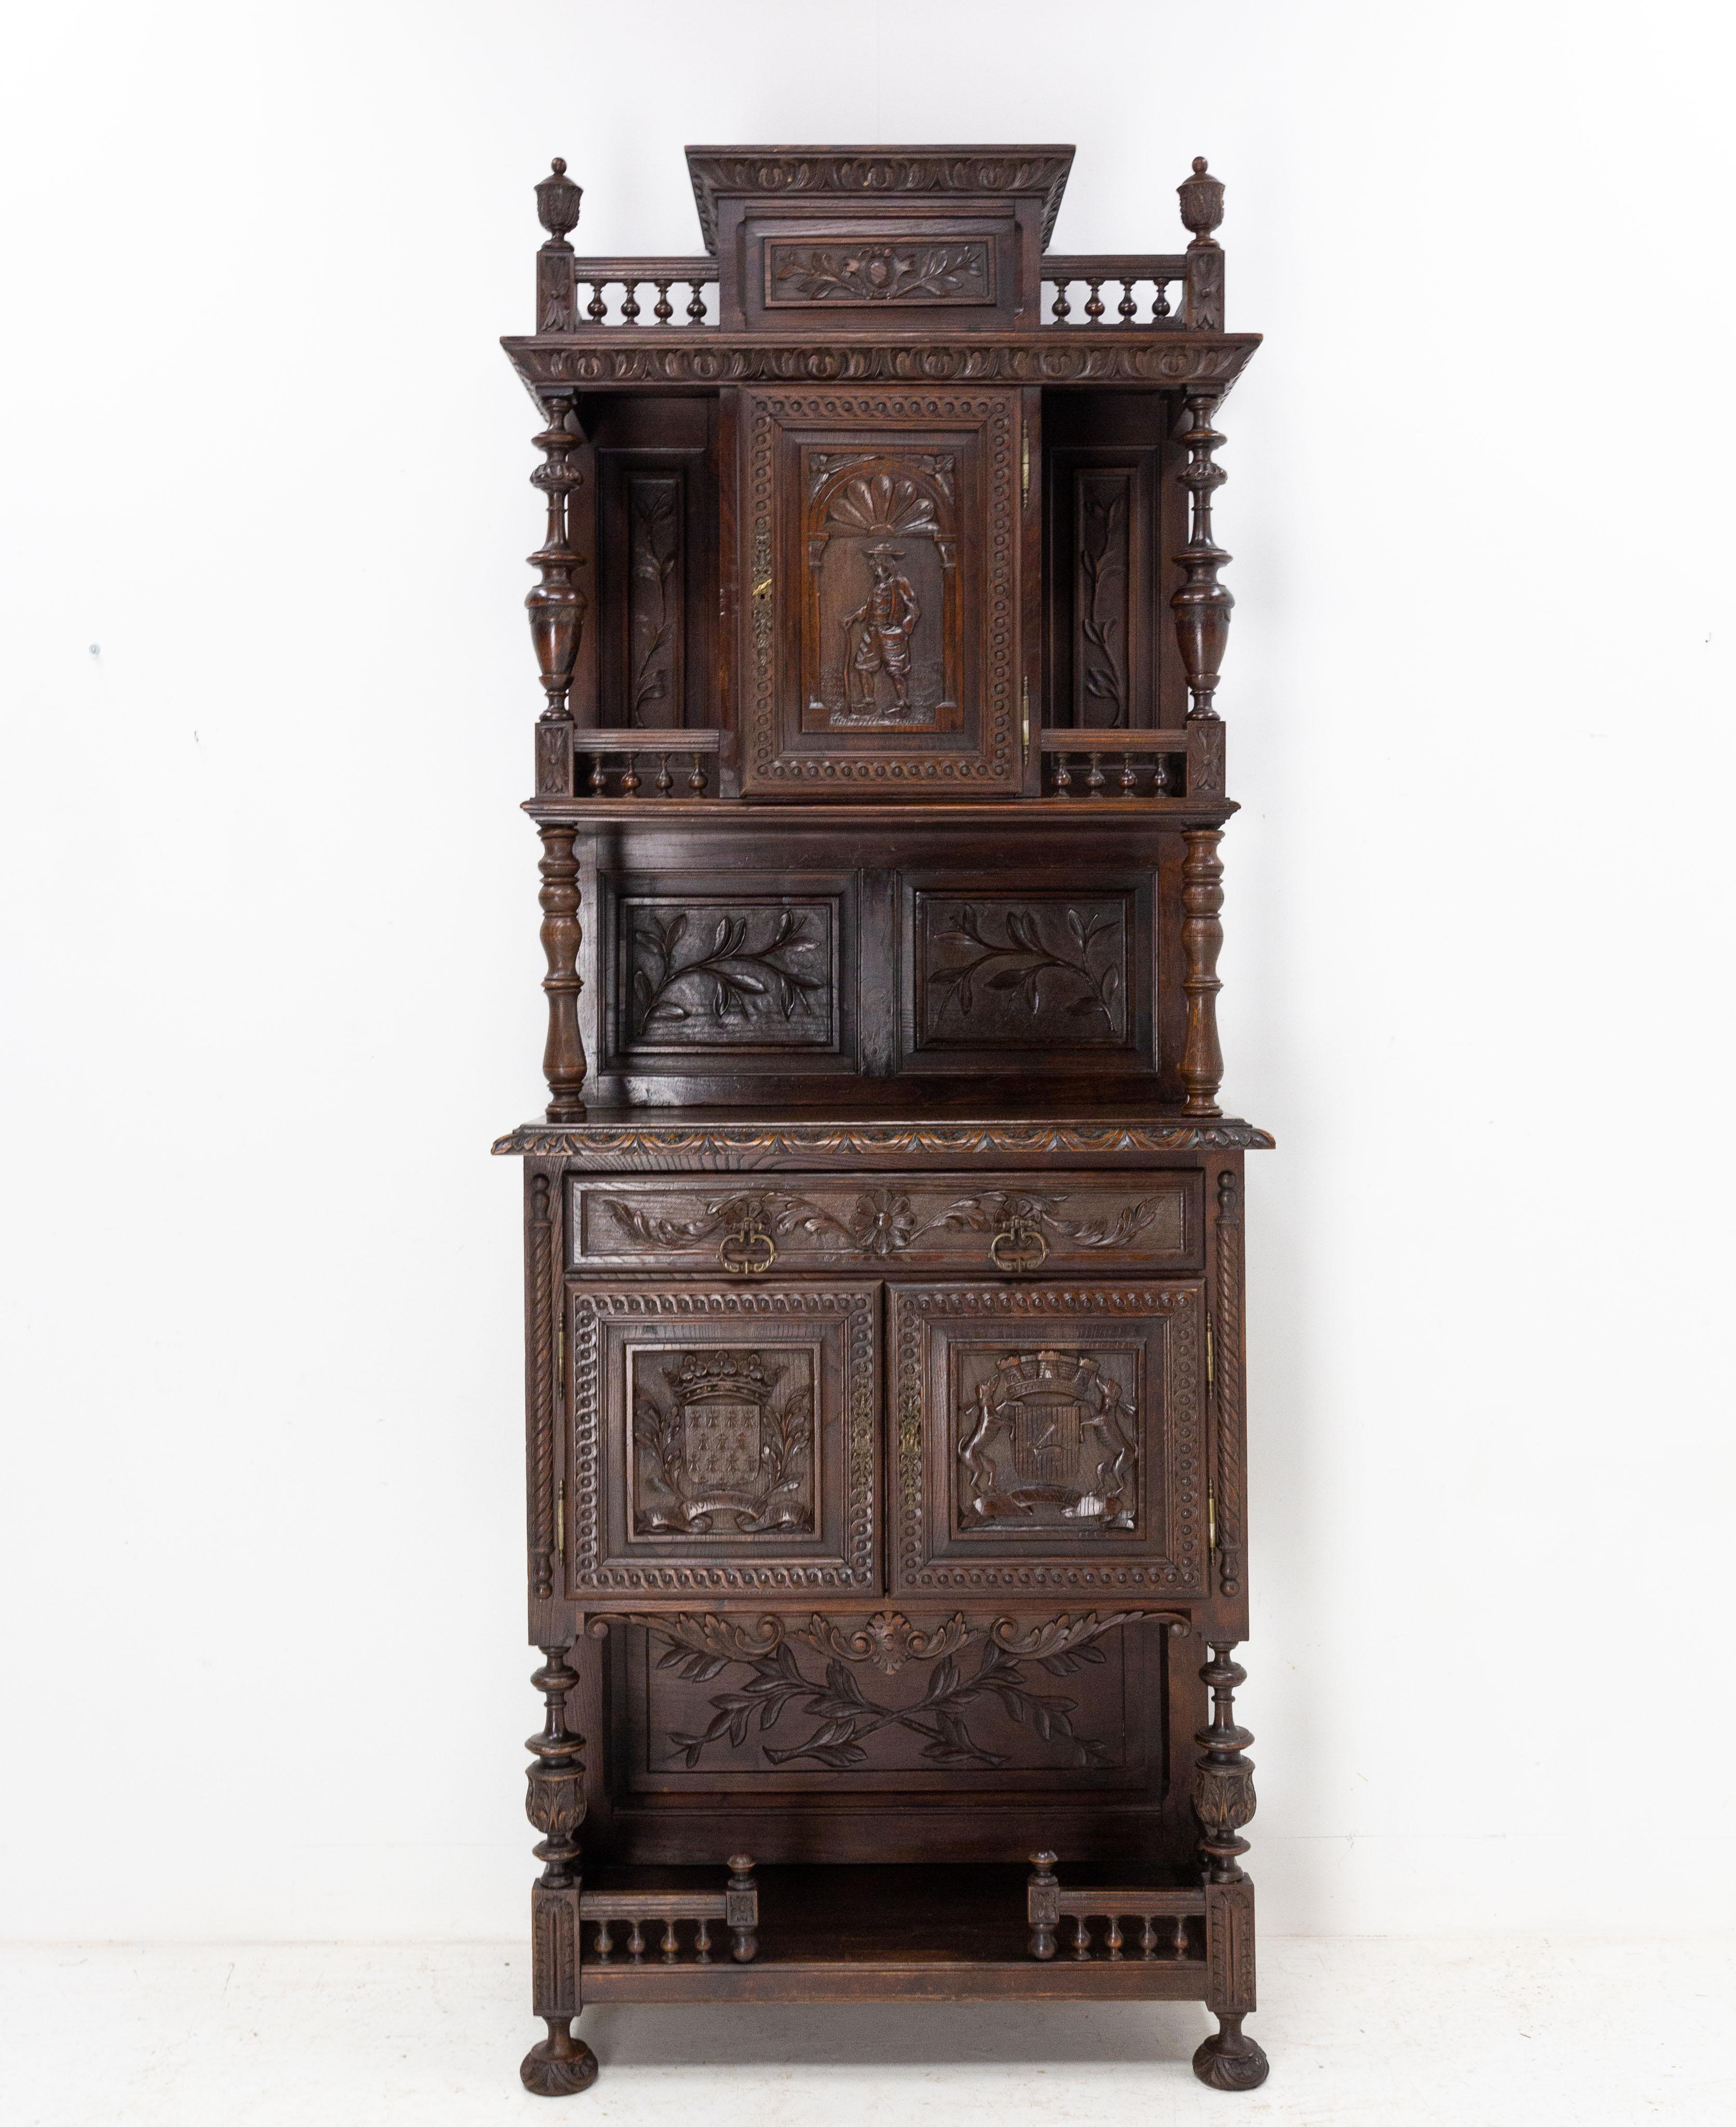 Buffet dressoir French cabinet, circa 1880.
From the area of French Britanny.
Three carved doors representing a man in the traditional dress of Britanny and two blazons.
One drawer.
Florals and vegetal motifs on the front and on the sides of the